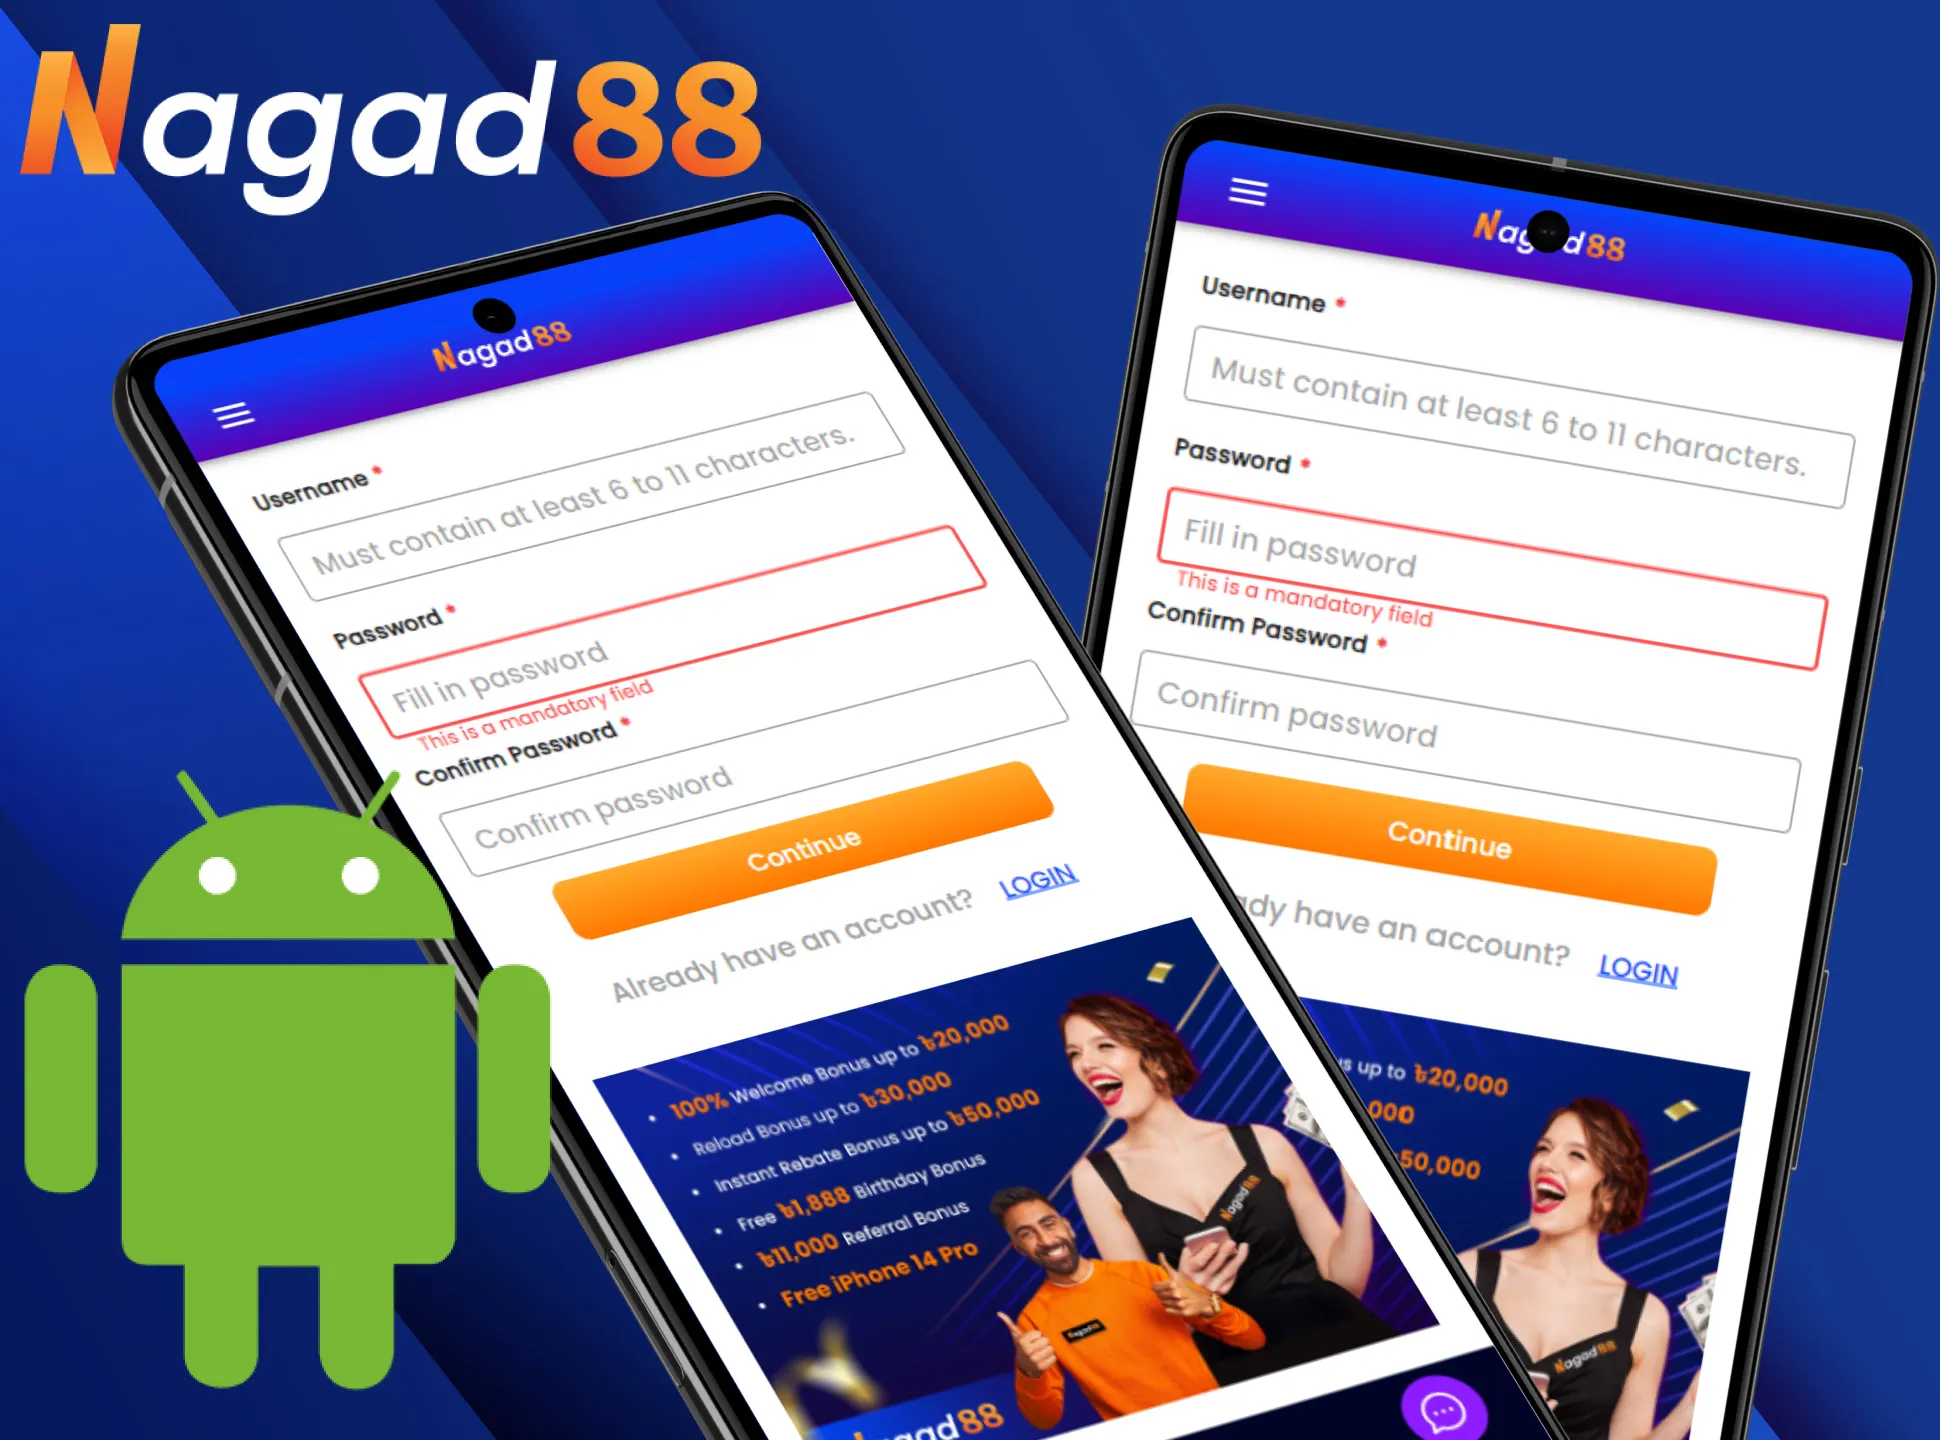 Create your own Nagad88 account to place bets and play casino games.